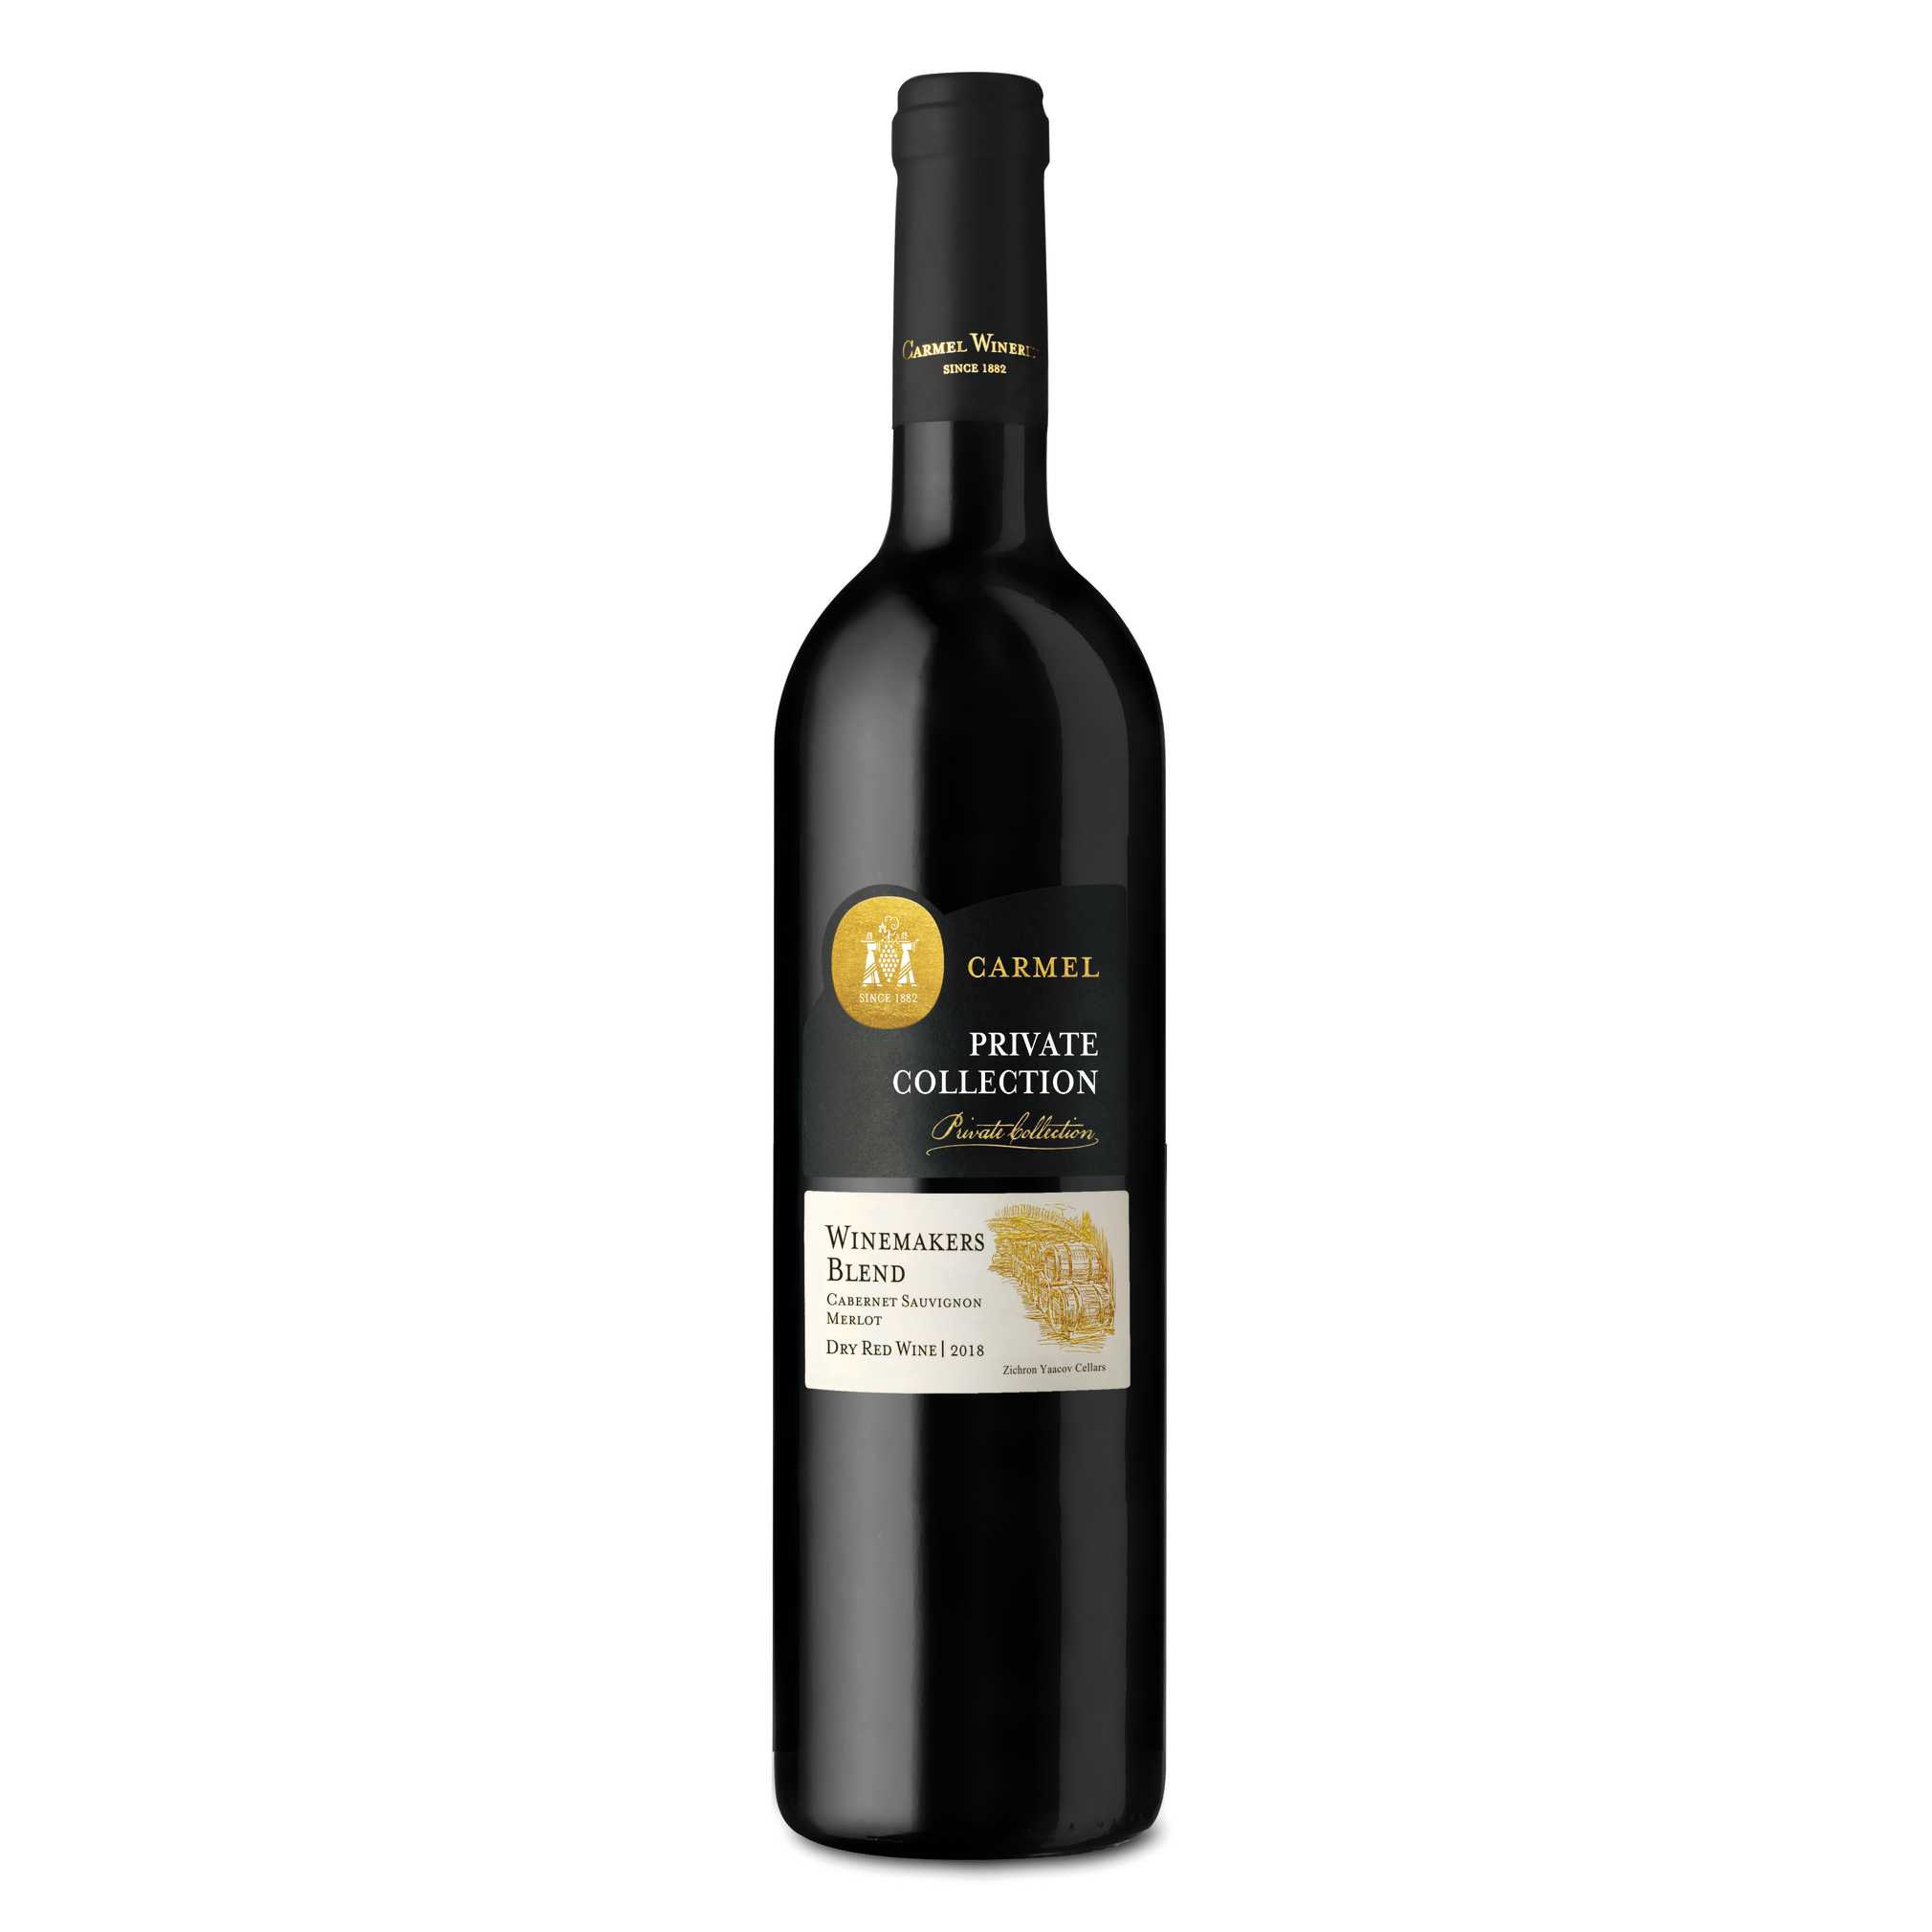 Carmel Private Collection Winemakers Blend - A Kosher Wine From Israel